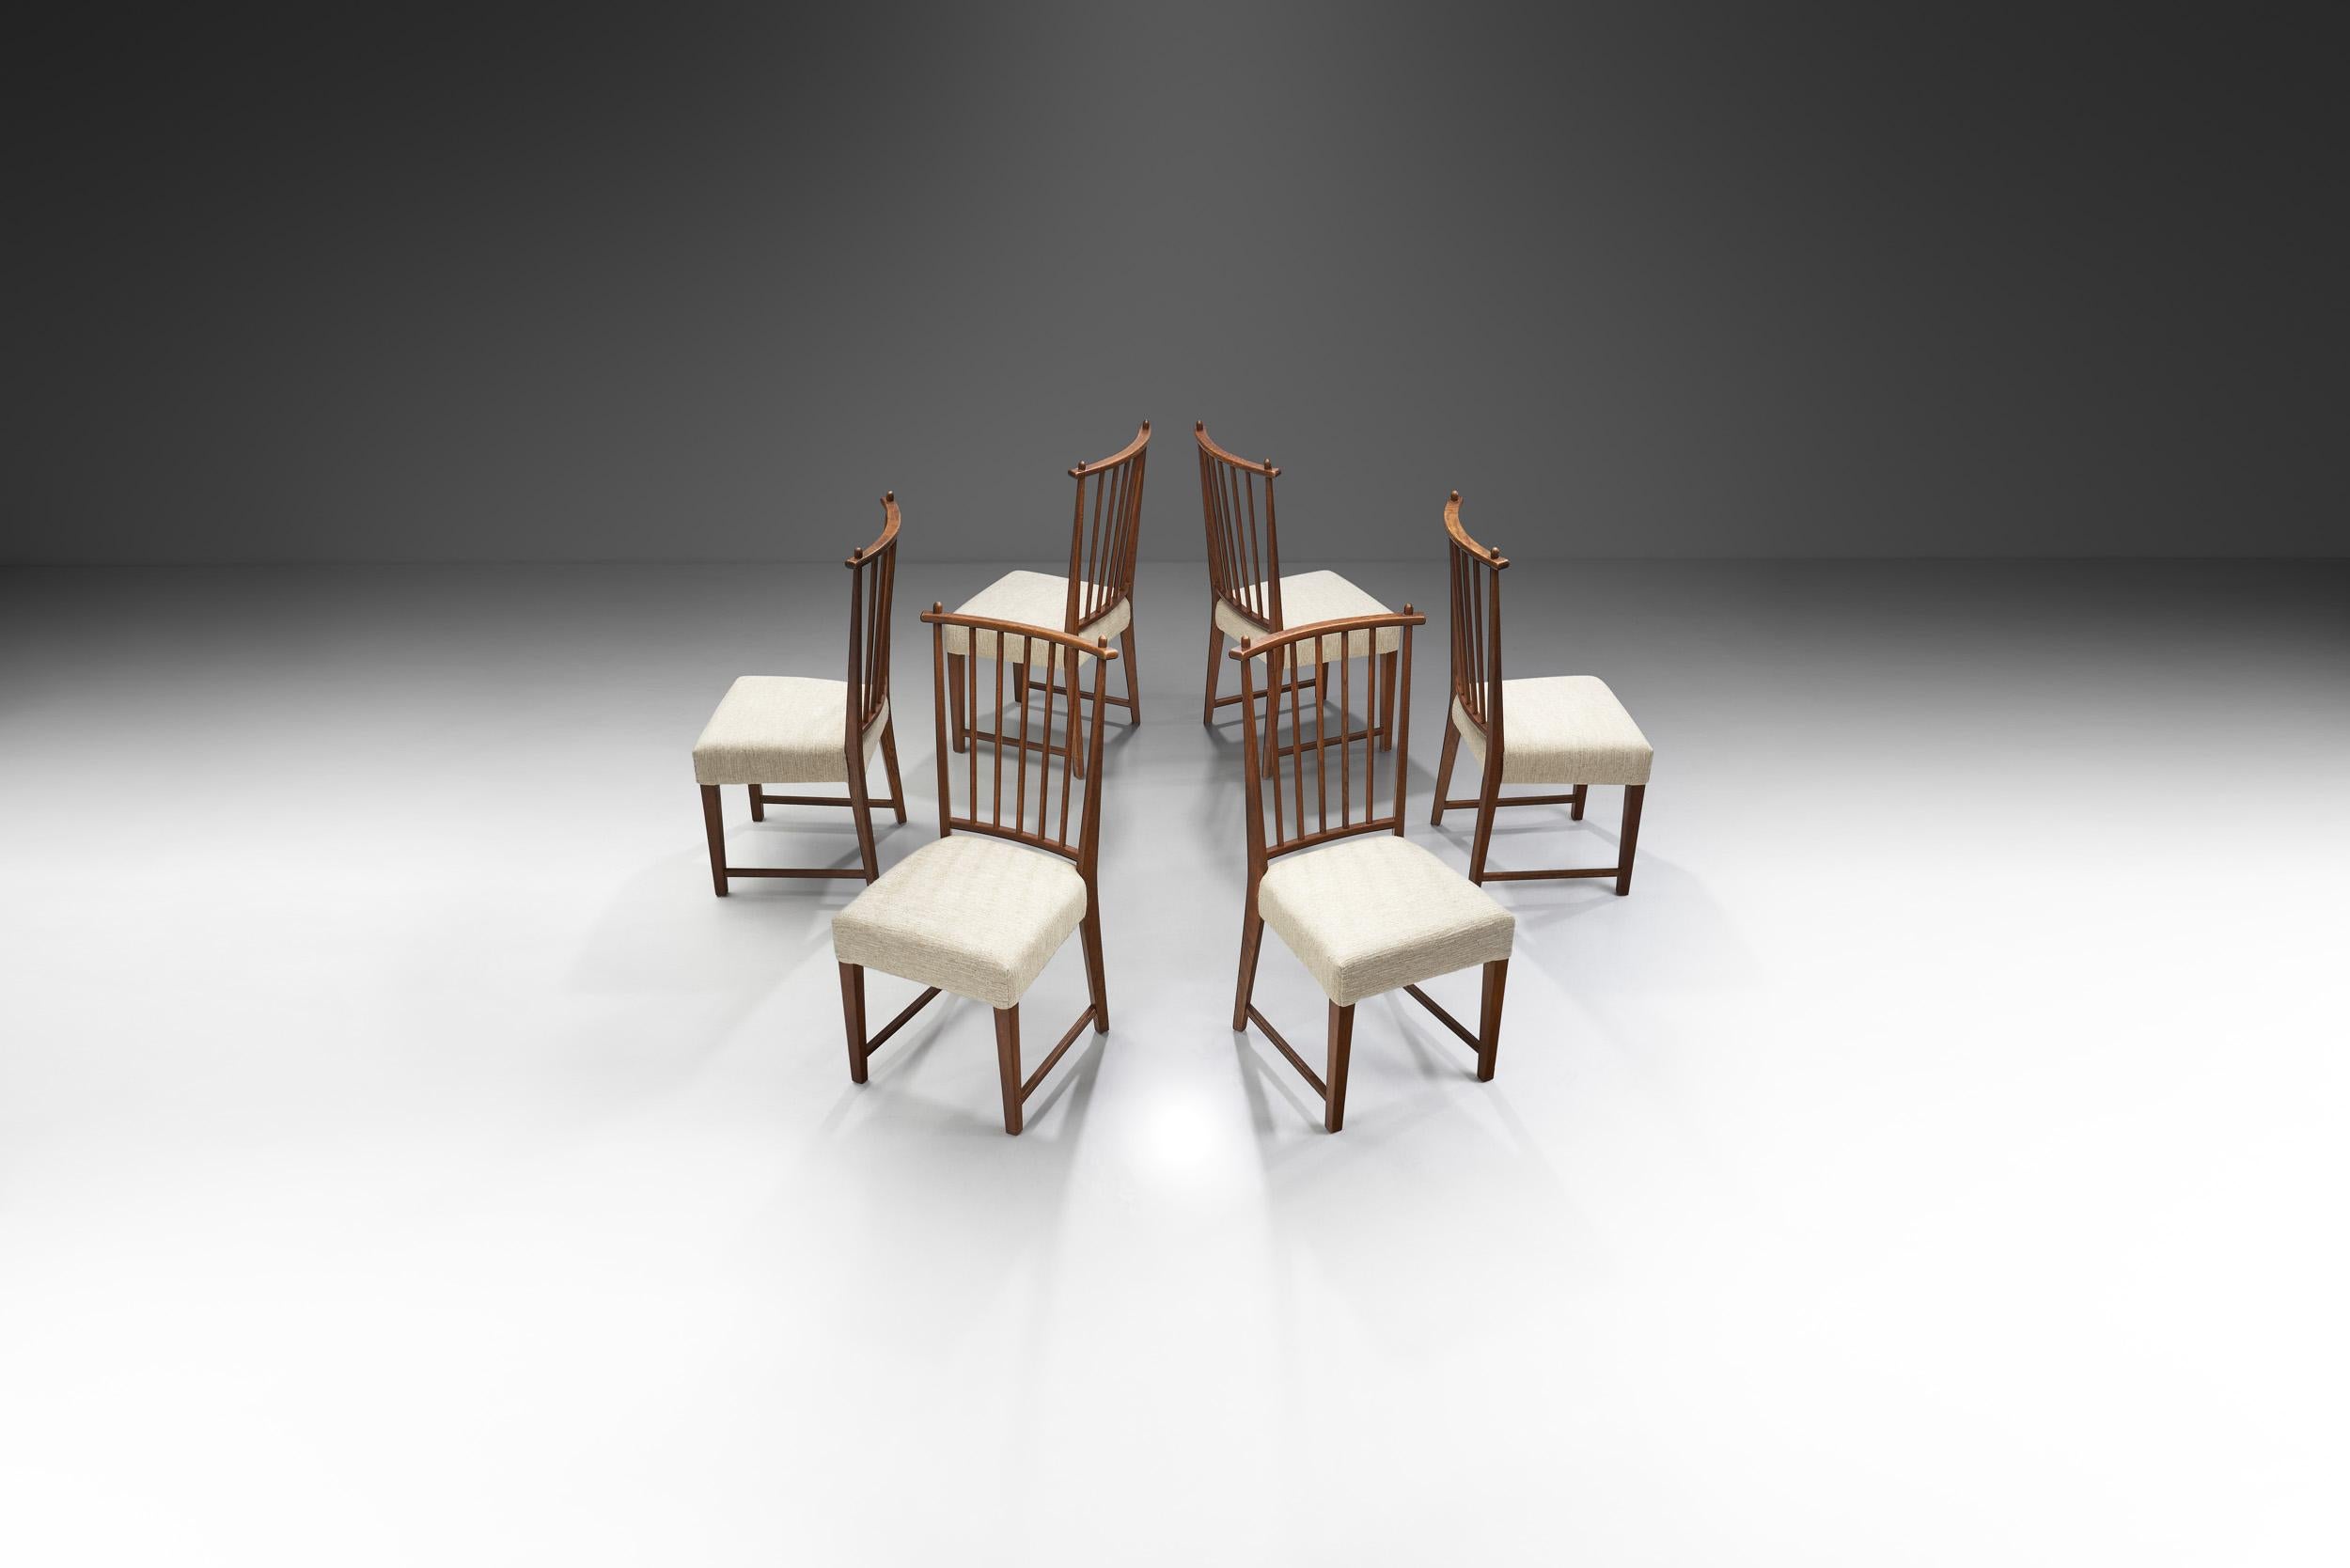 These rare dining chairs from Dutch designer, Bas van Pelt, are testimonies to the less talked about, but brilliant era of early Dutch modernism. Van Pelt’s designs were only produced when an order was placed, therefore the numbers of the models are